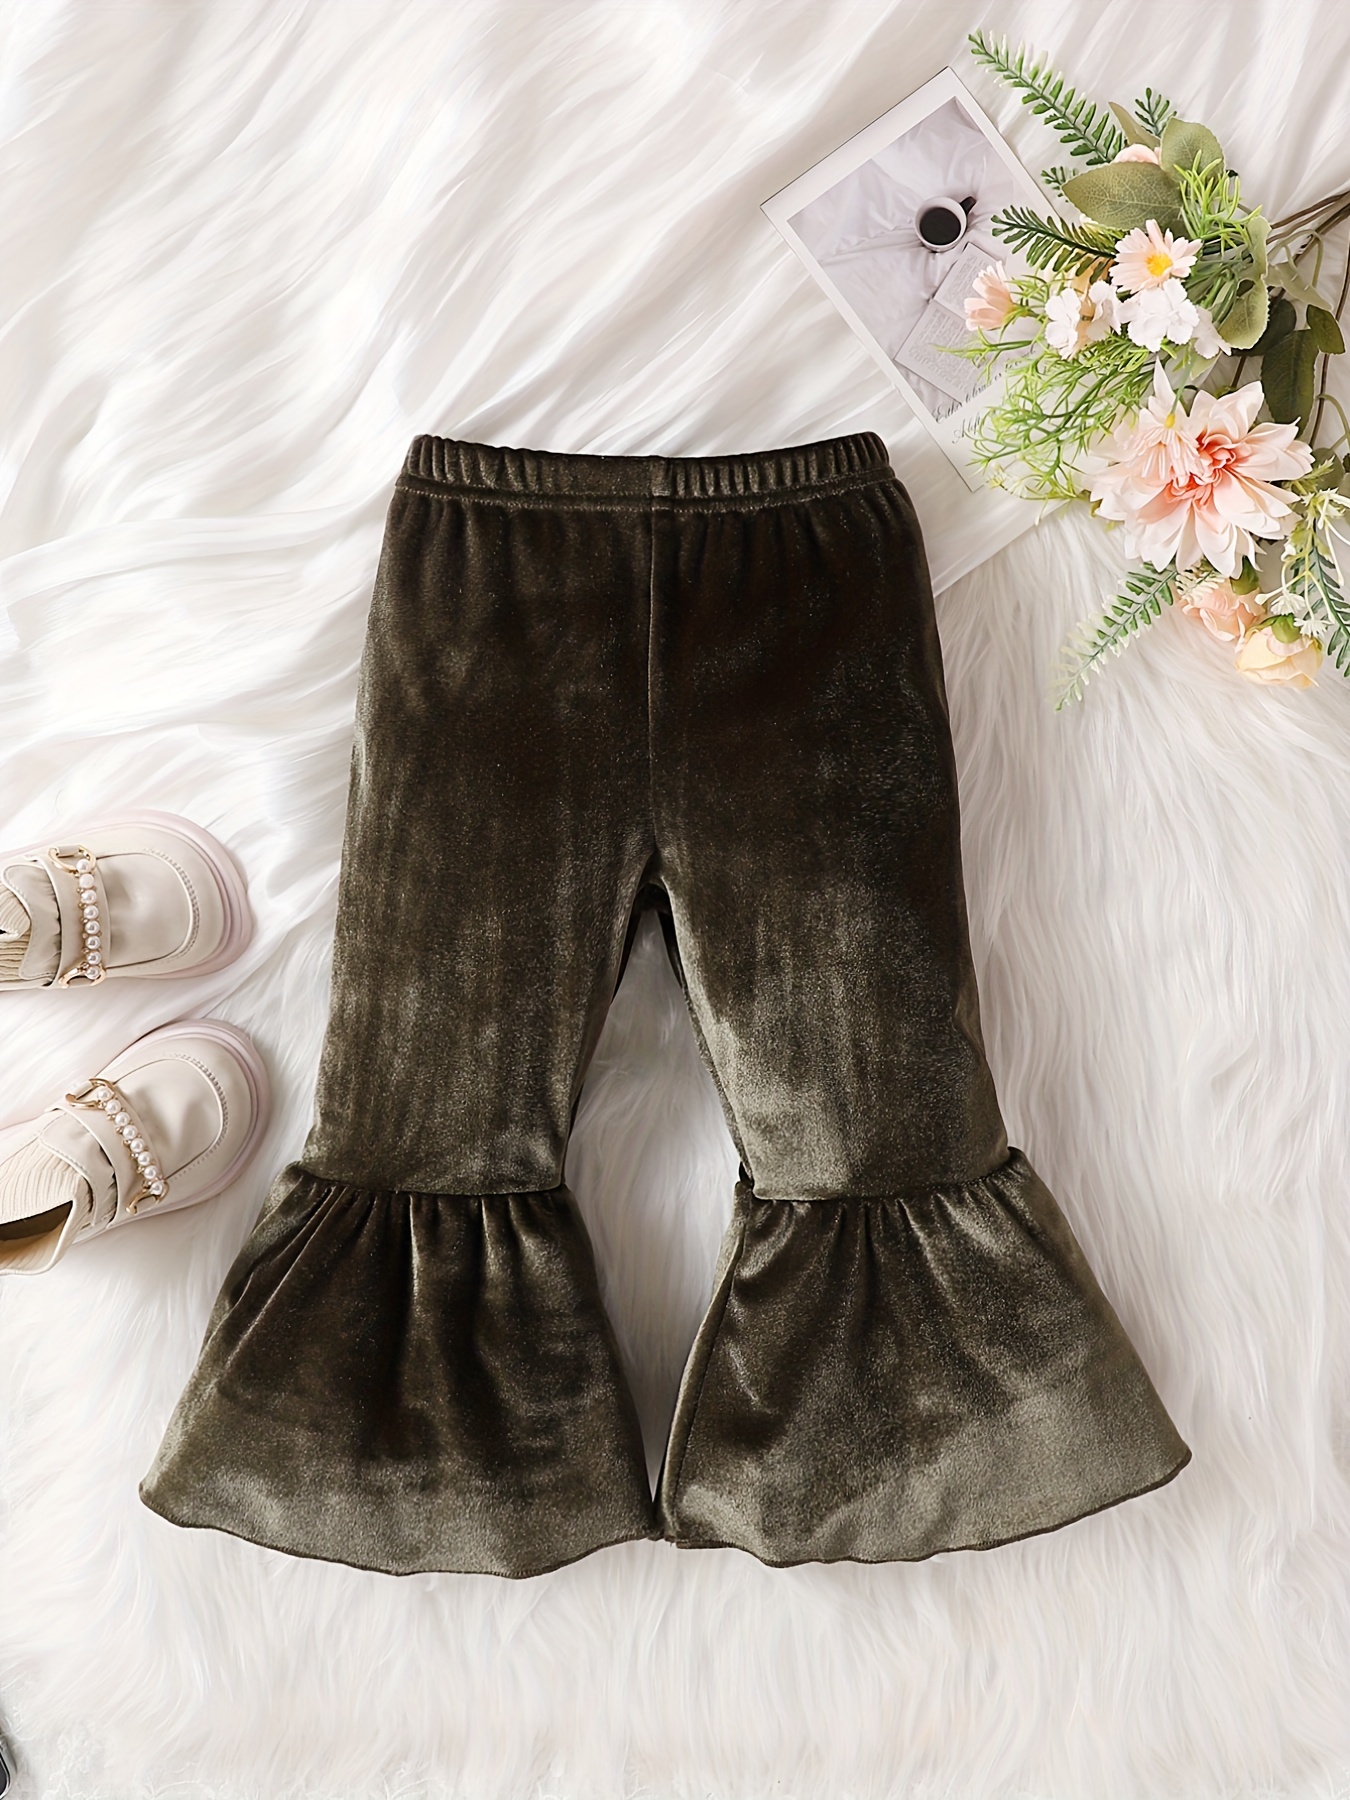 Girls Jeans Lace Cuffs Bell Bottom Casual Flared Pants For Spring And Autumn